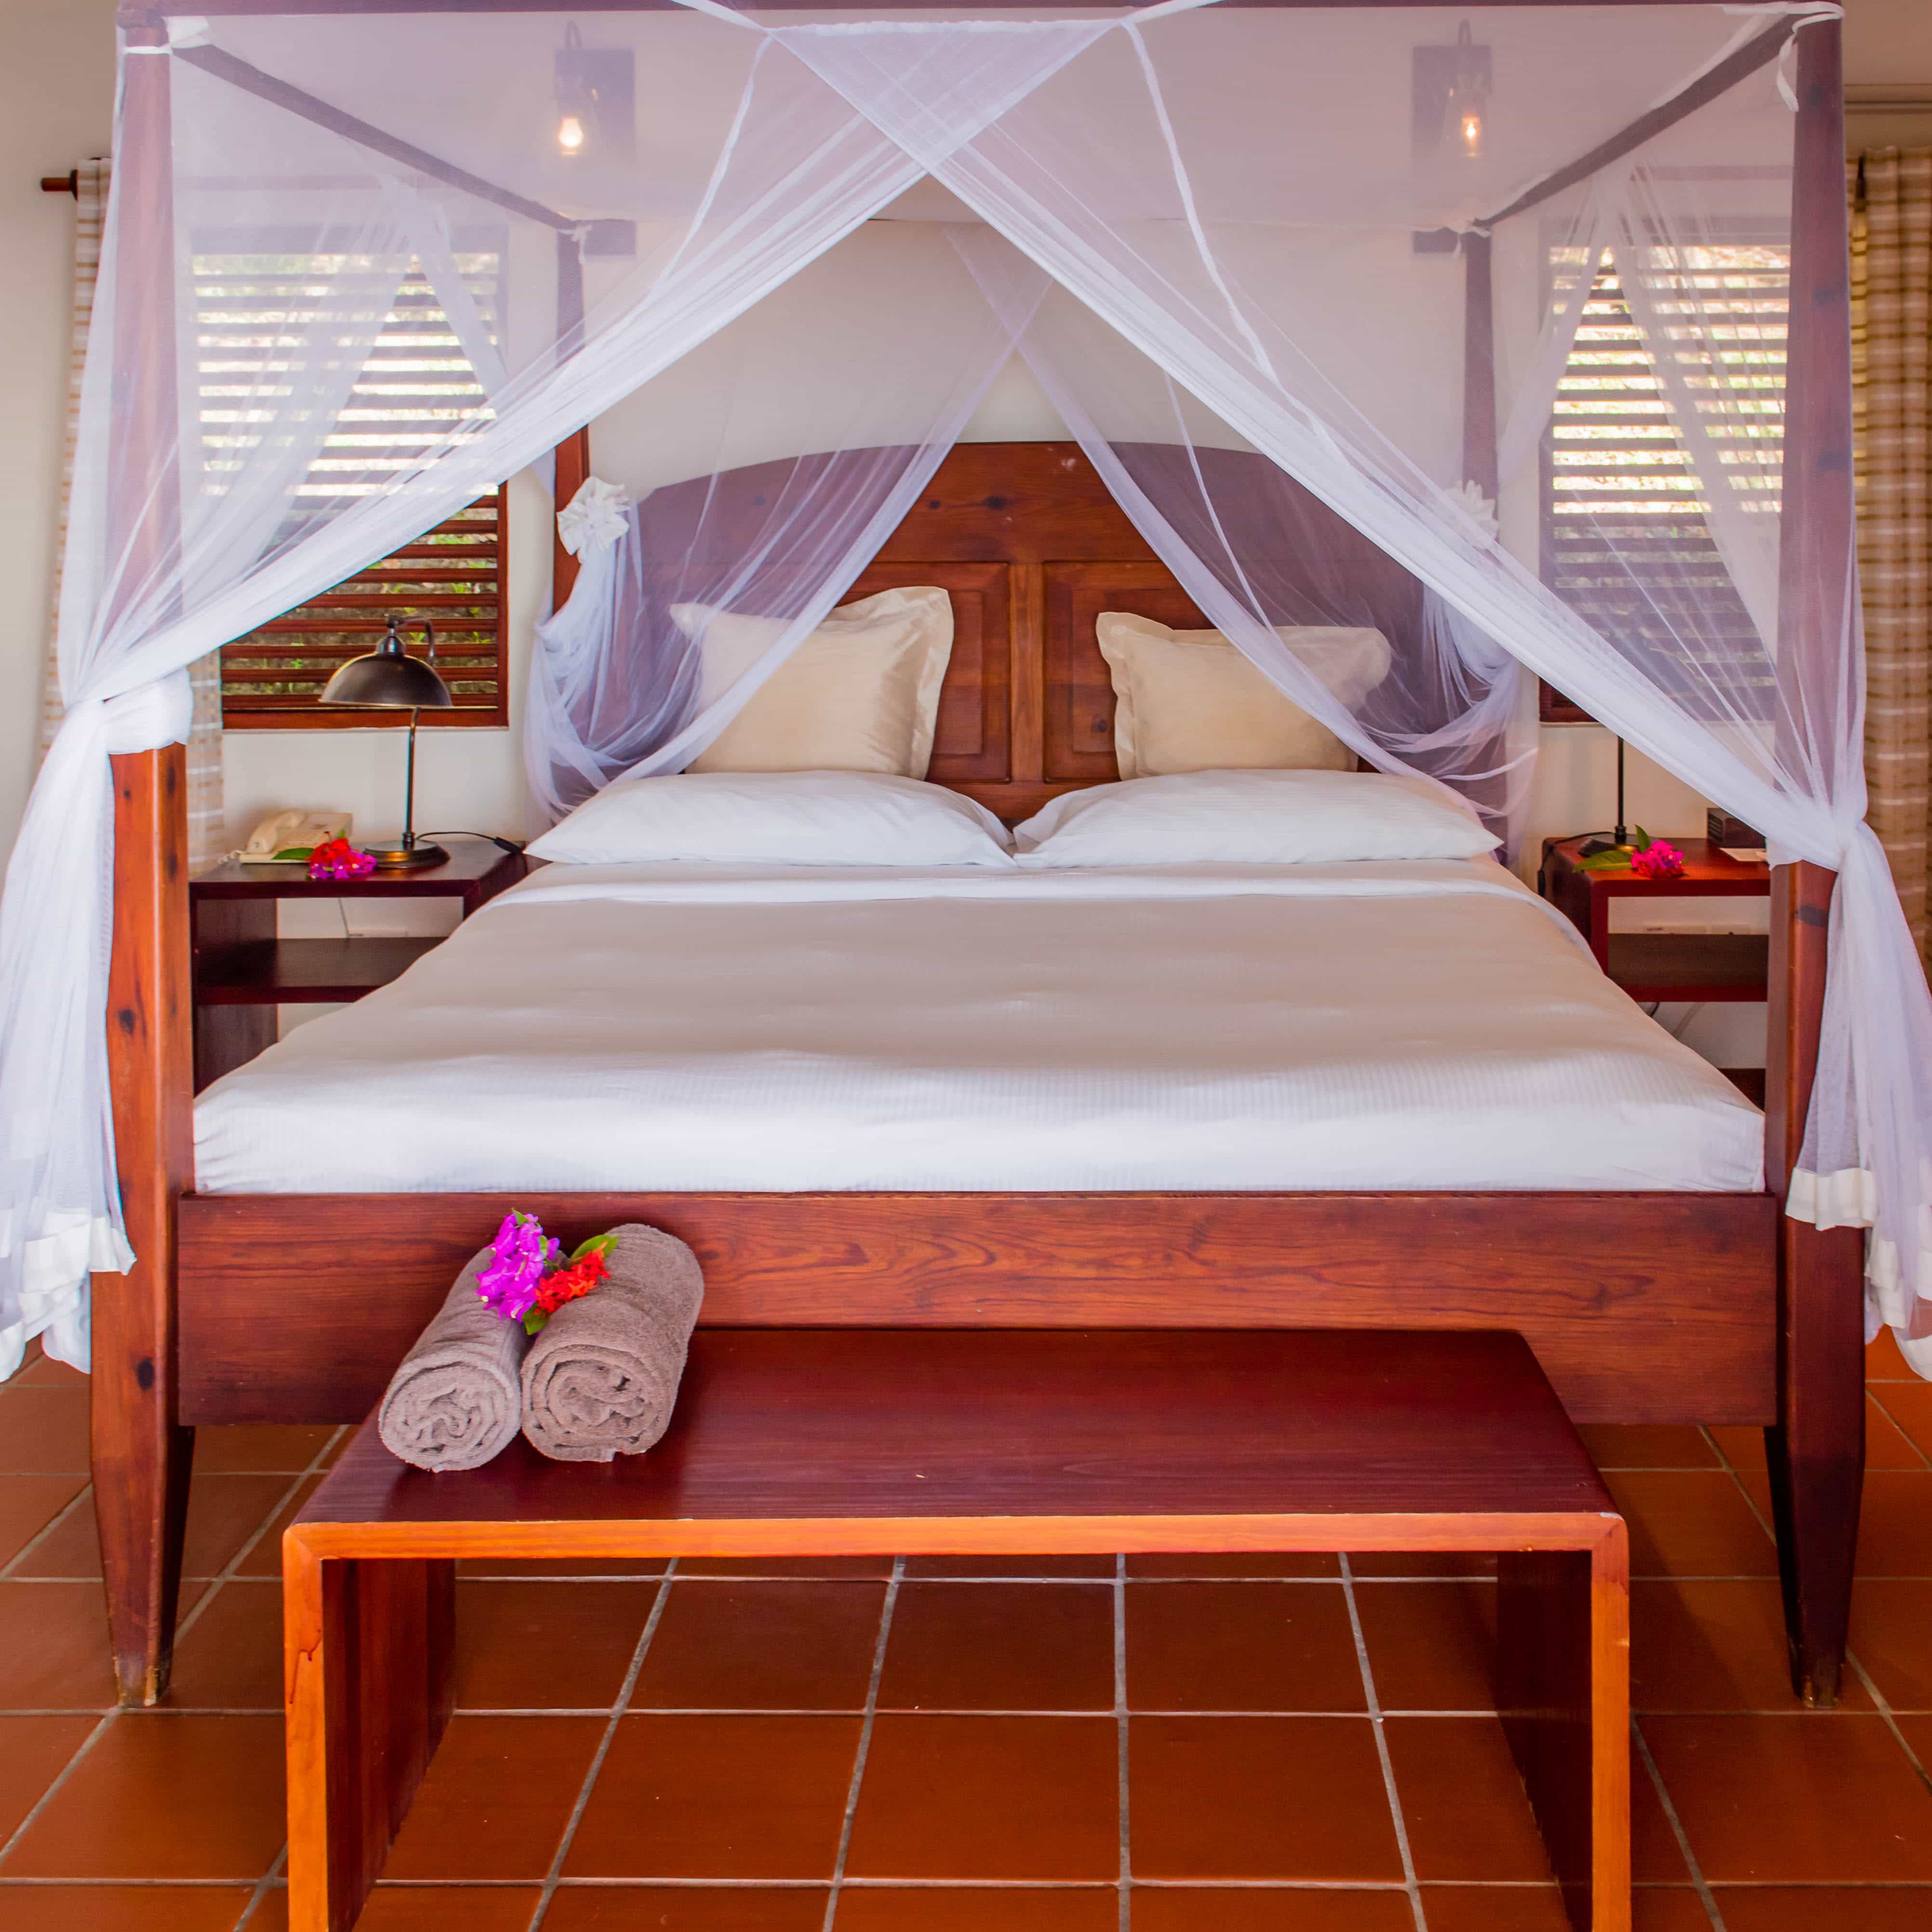 Your exotic bed awaits.